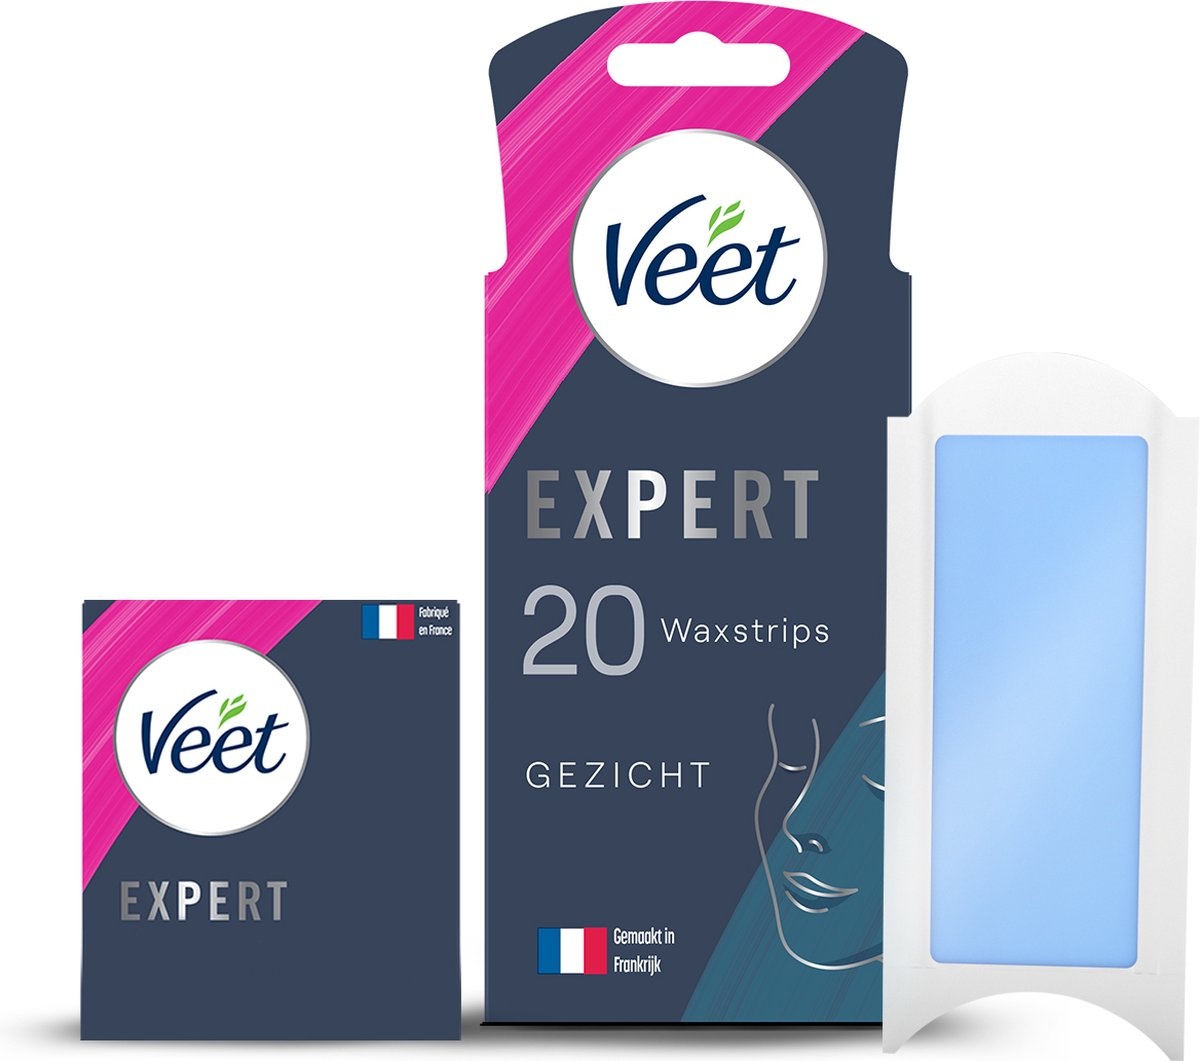 Veet Expert Hair Removal Strips - Face - Sensitive skin - 20 pieces - Packaging damaged